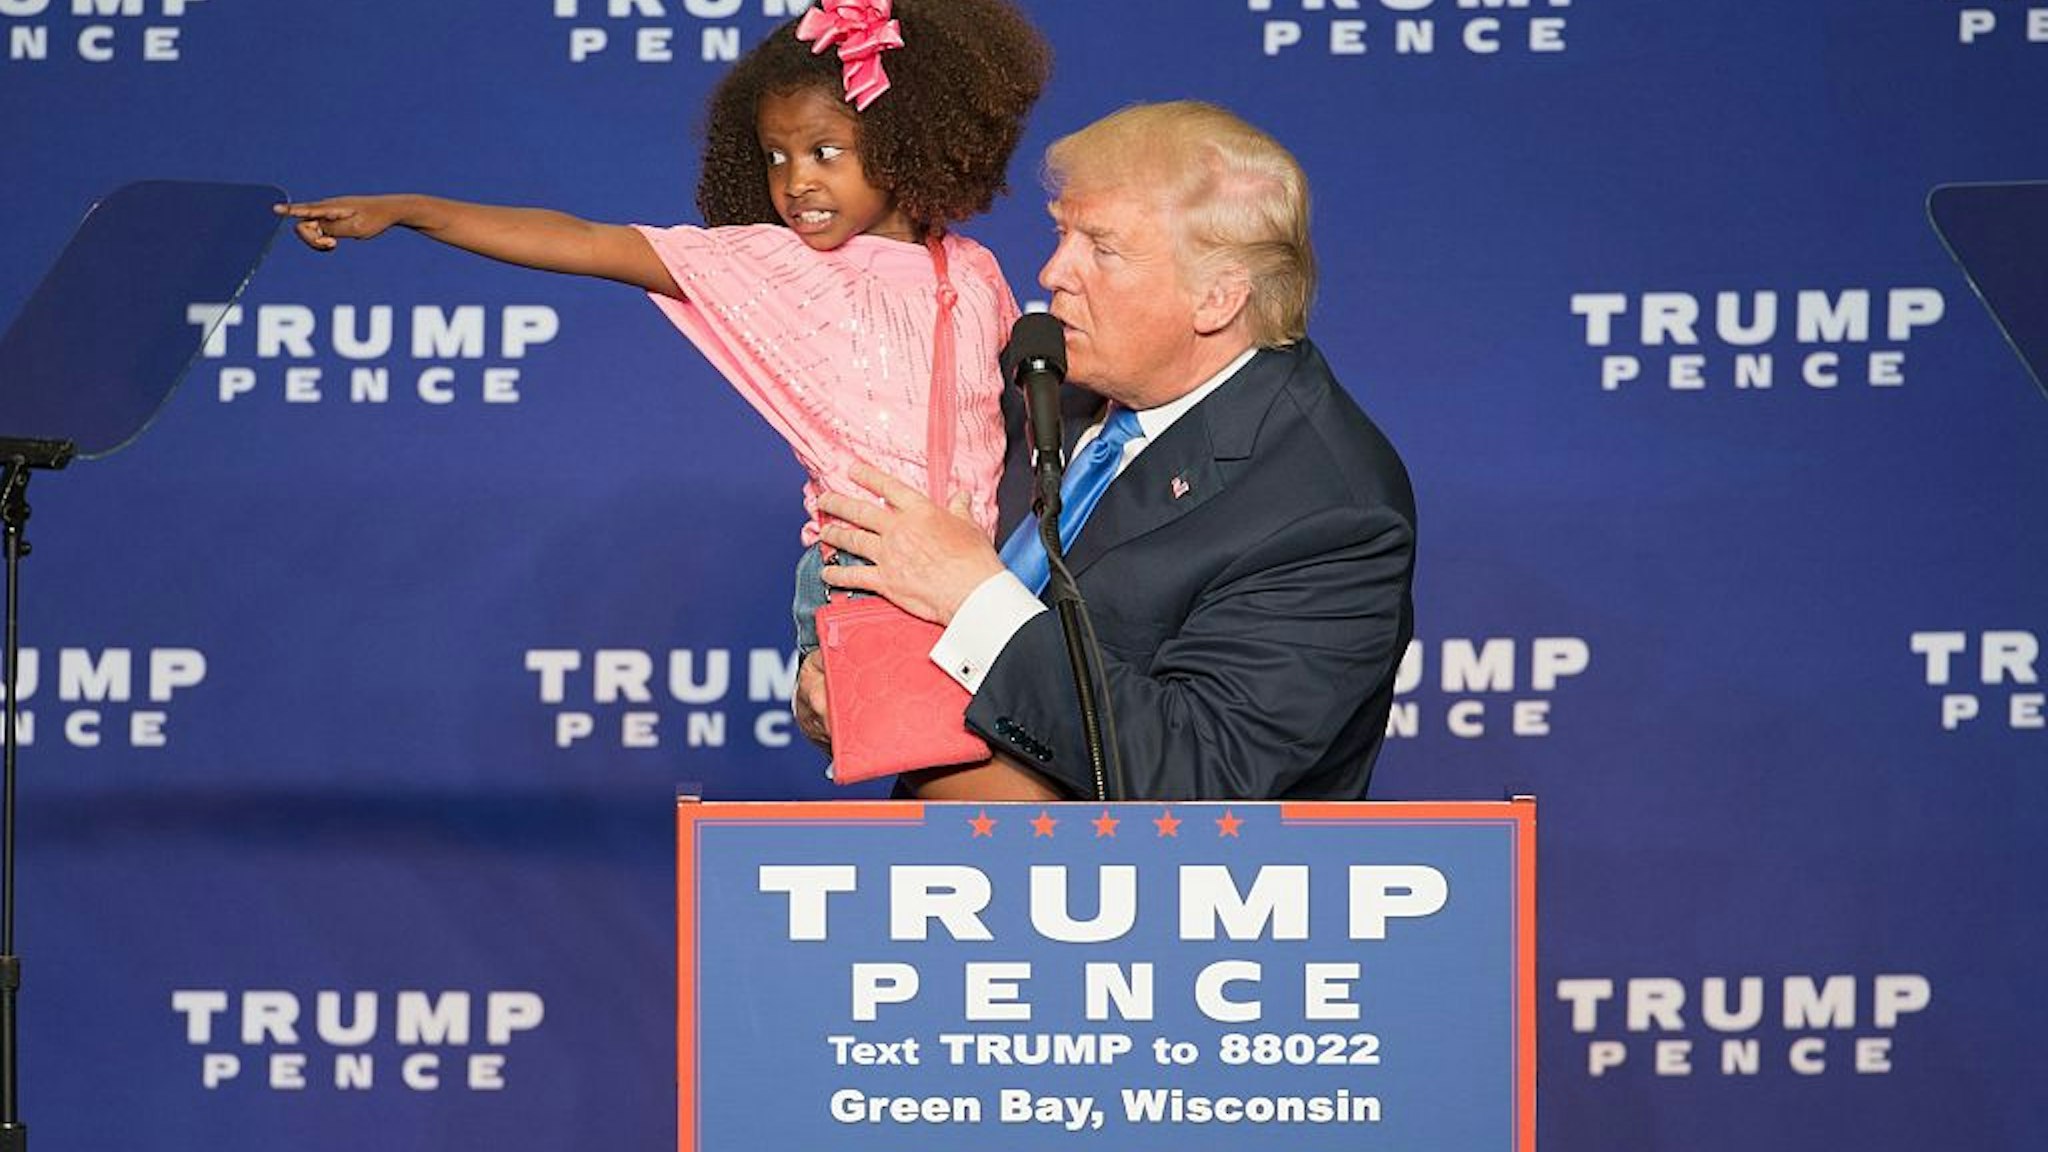 Republican presidential nominee Donald Trump holds a child as he speaks during a rally at the KI Convention Center on October 17, 2016 in Green Bay, Wisconsin.